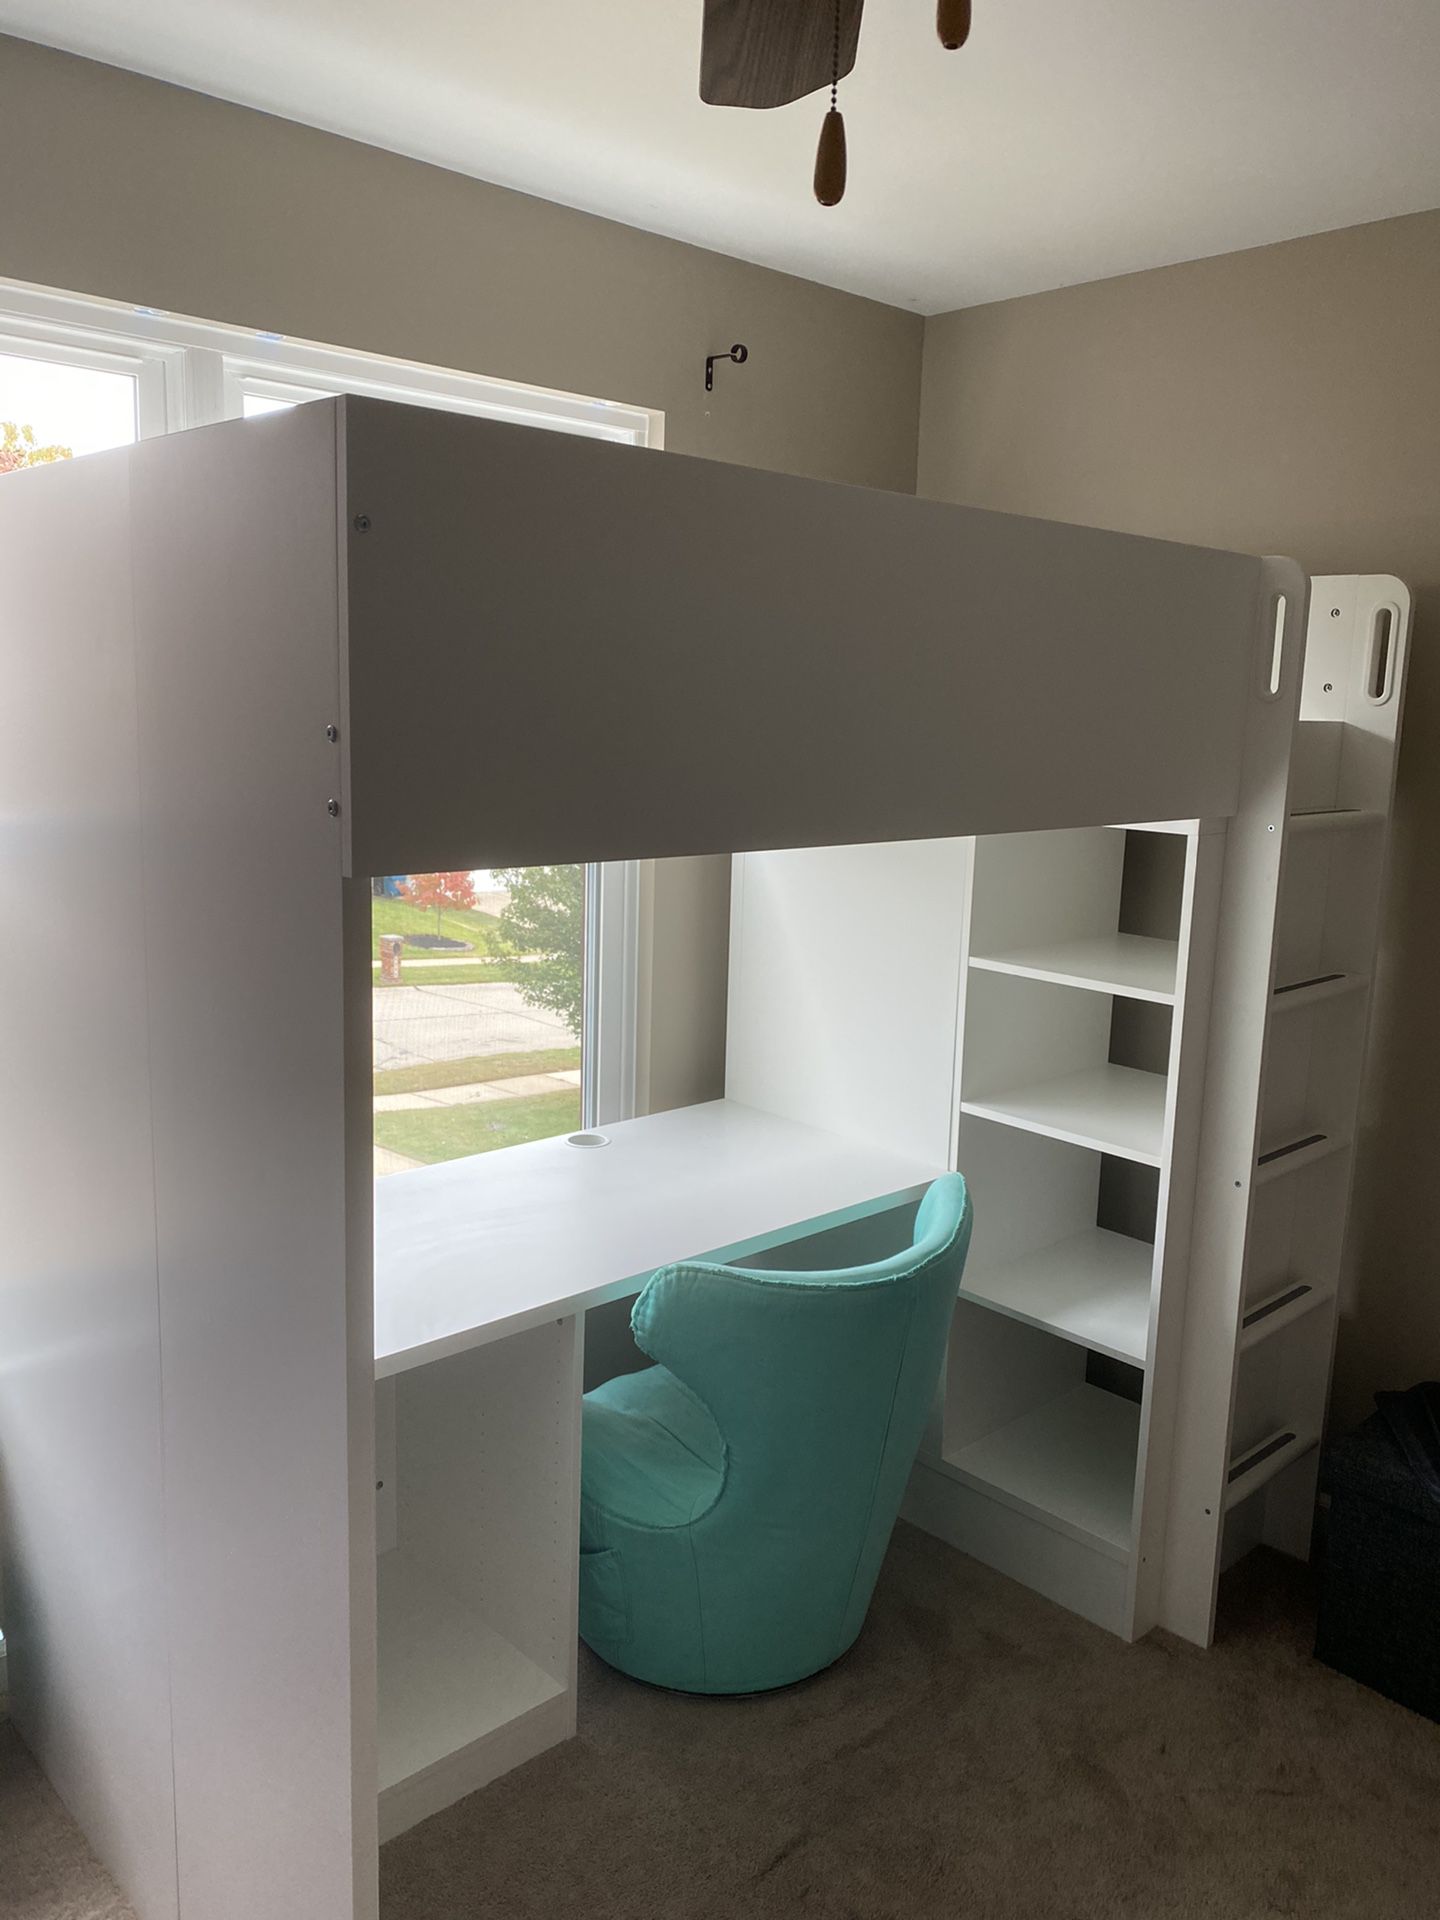 bunk beds with lots of storage ( negotiable price)